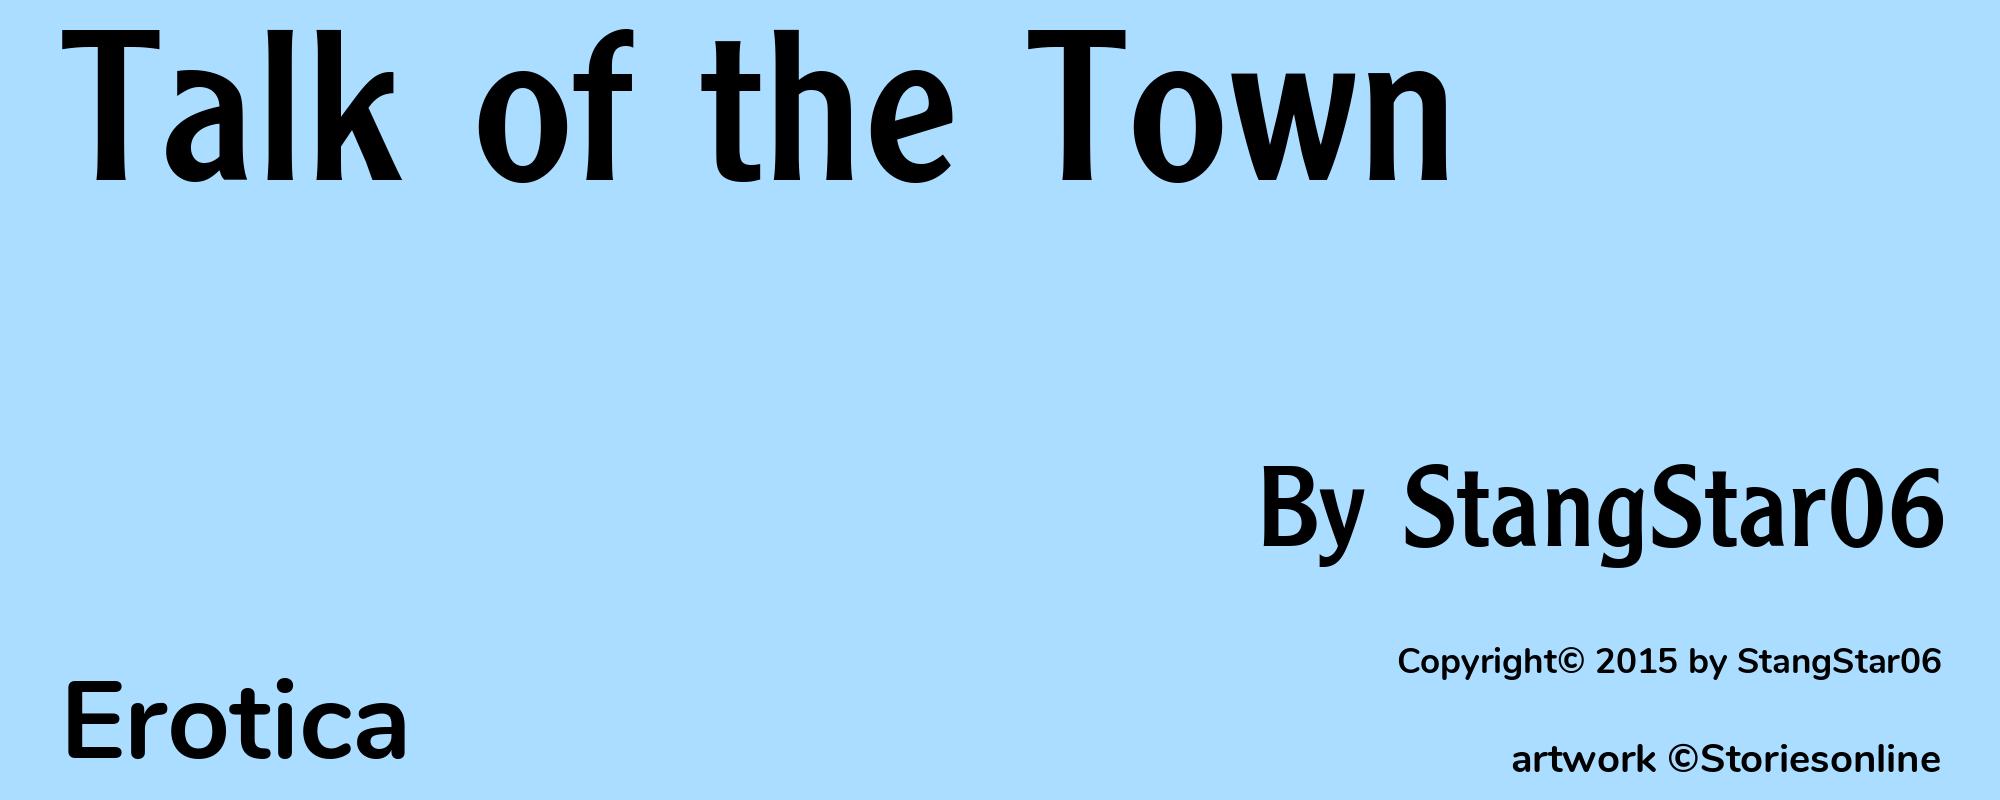 Talk of the Town - Cover